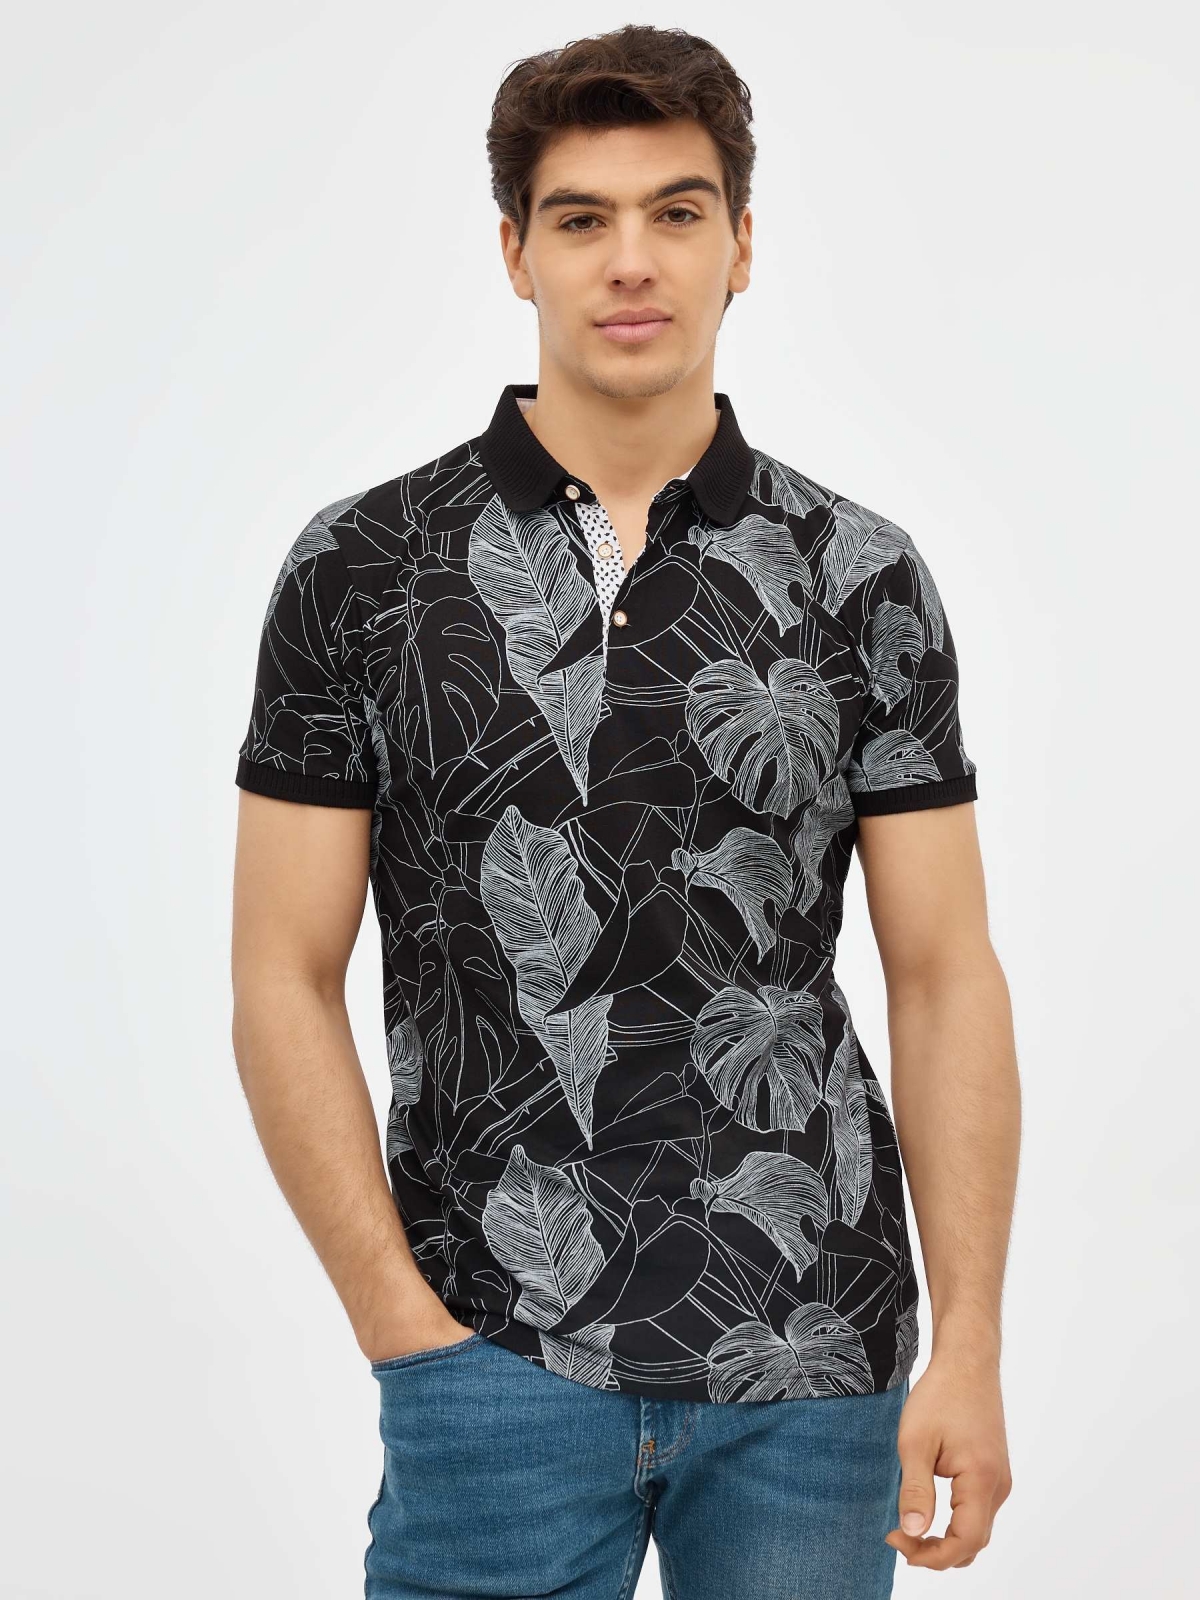 Floral print polo shirt black middle front view